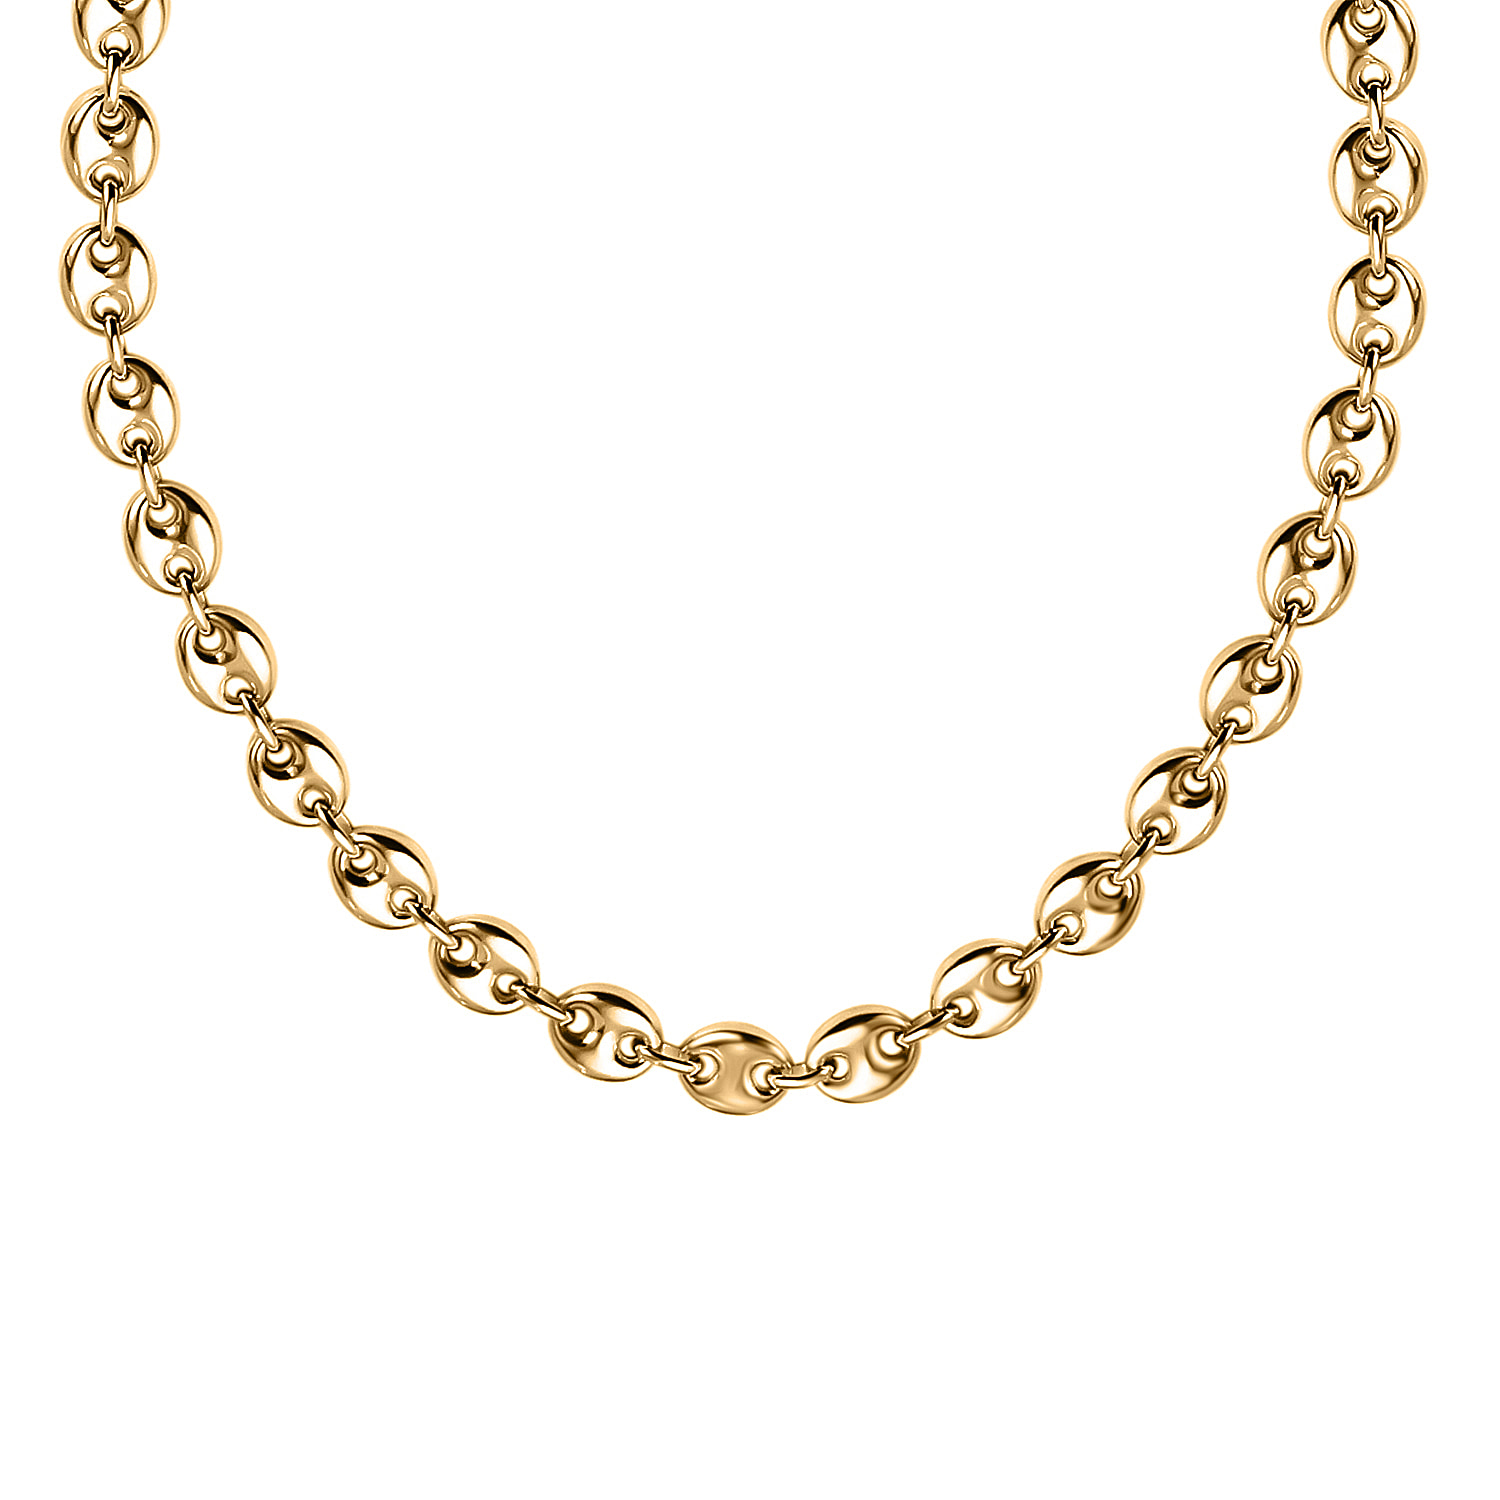 Manhattan Closeout - Yellow Gold Overlay Sterling Silver Mariner Necklace (Size - 20), Silver Wt. 35.00 Gms